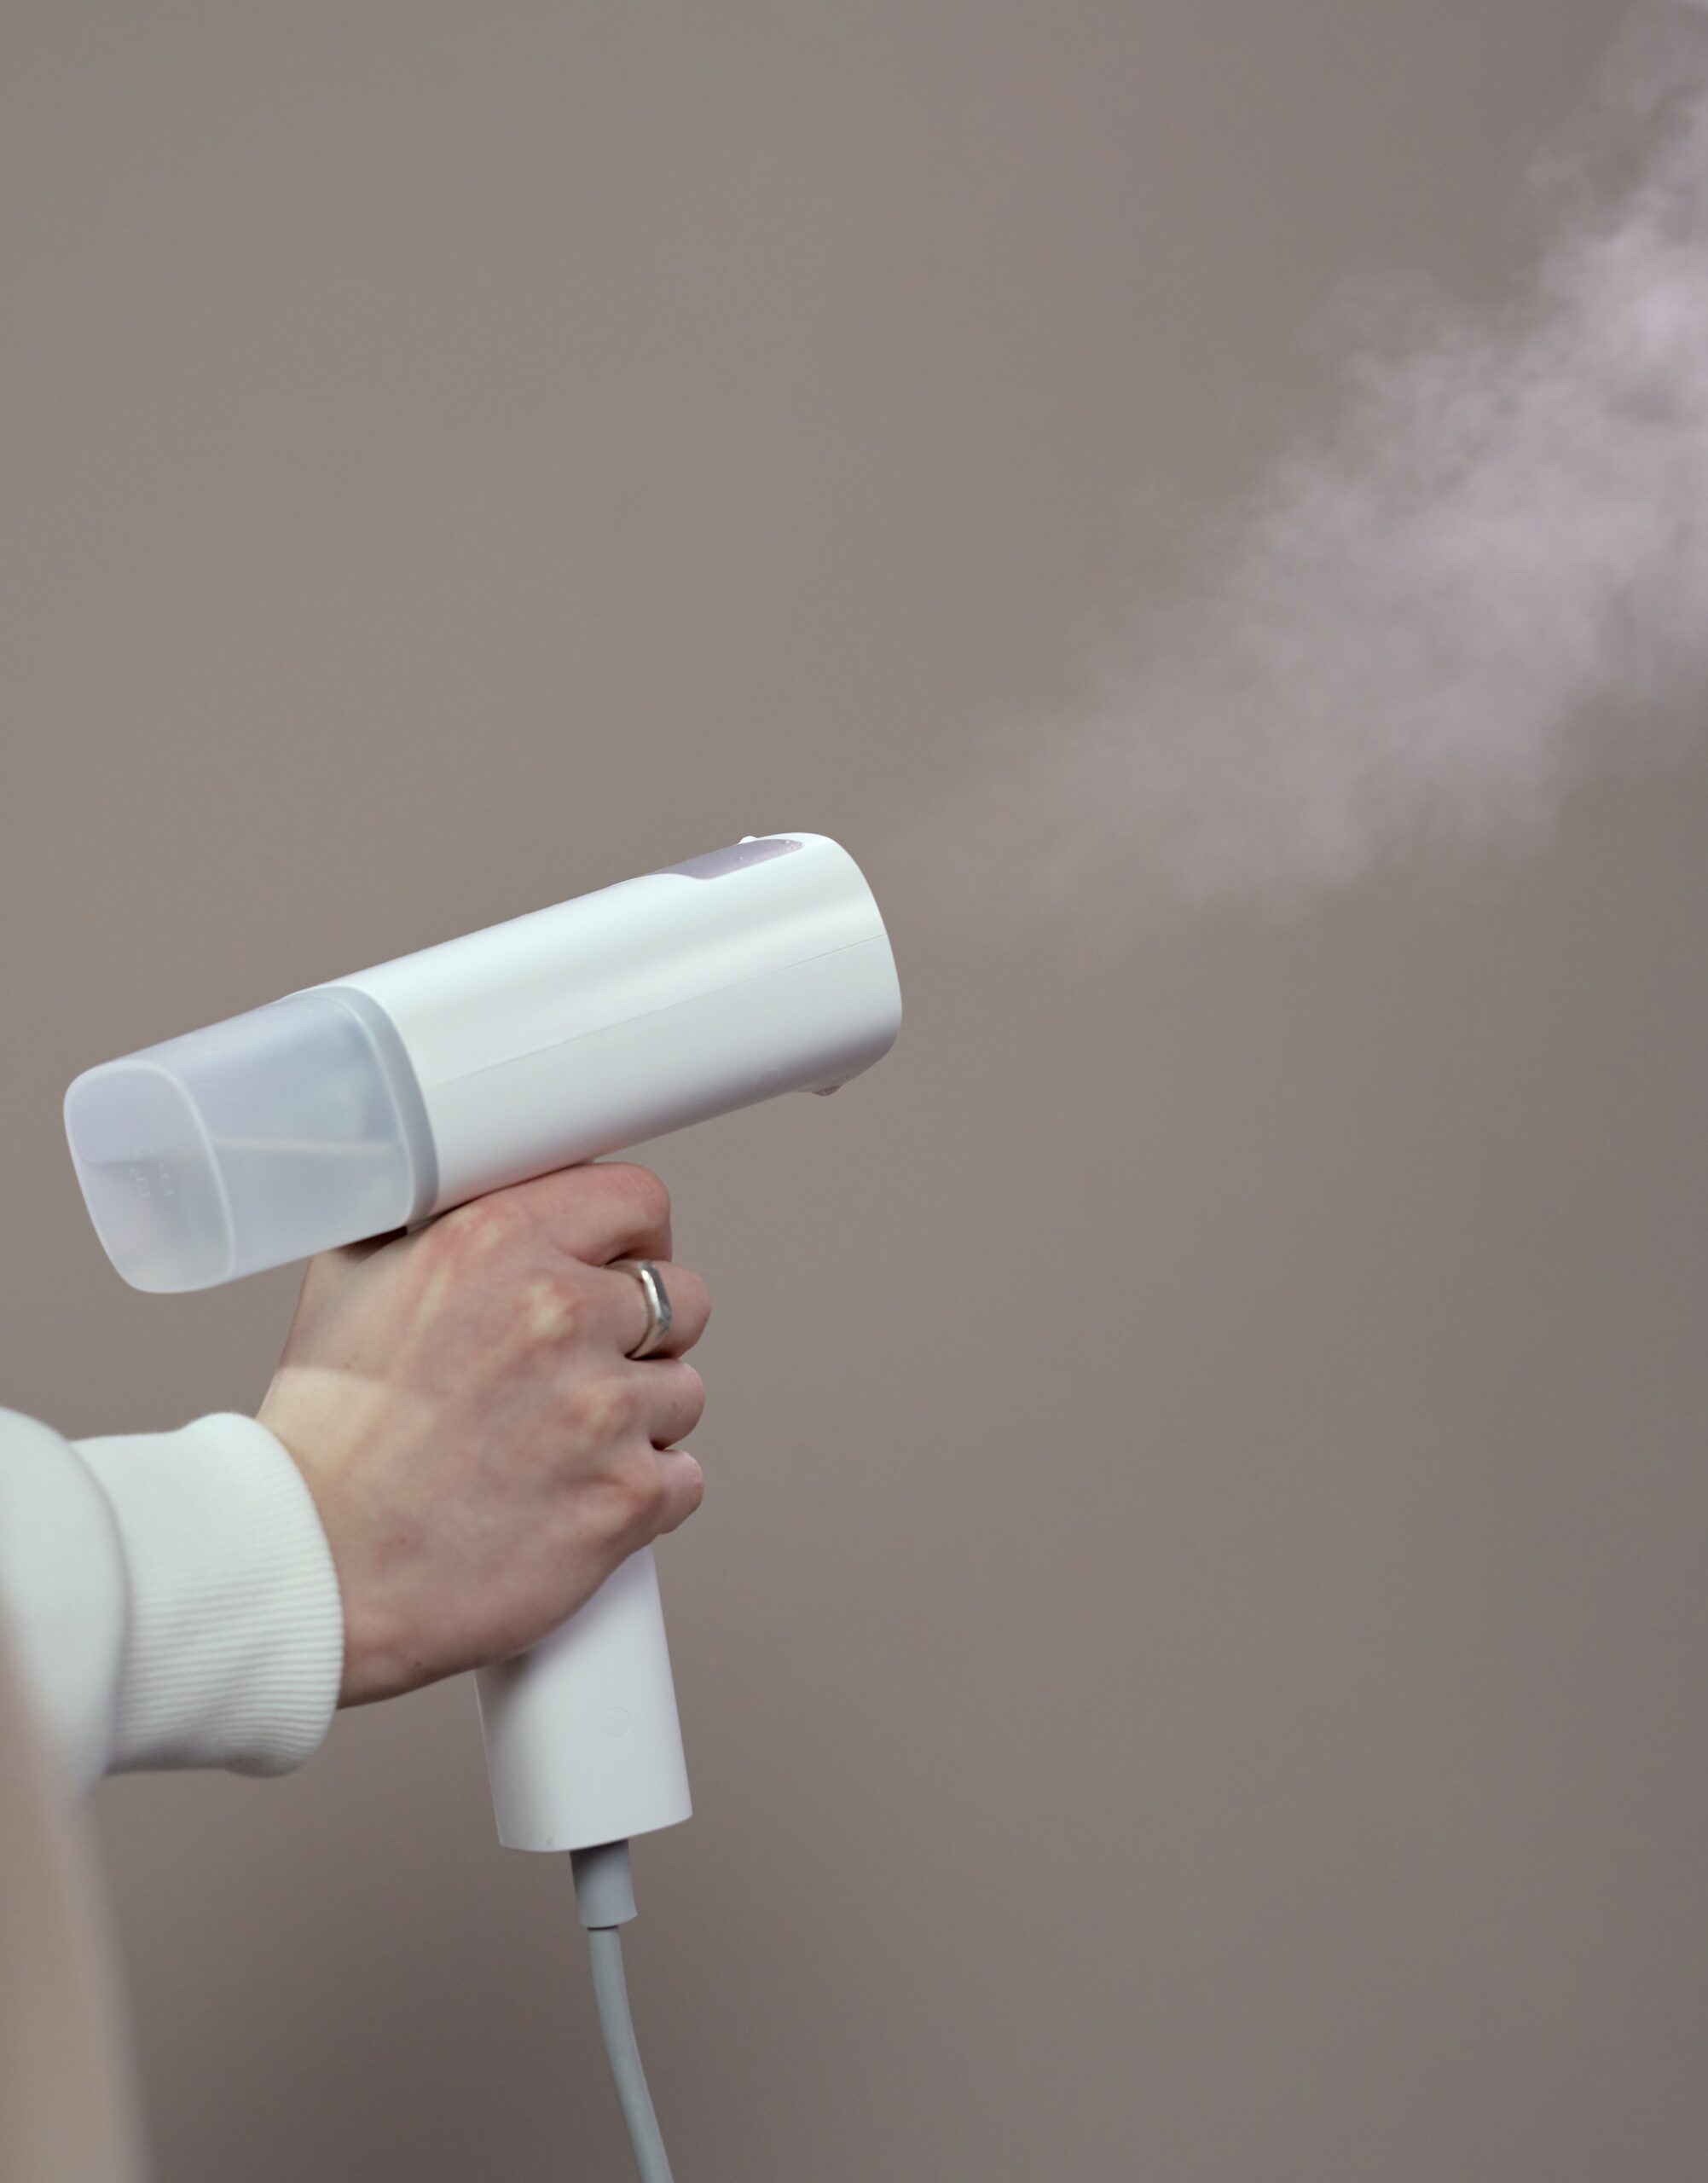 how to clean curtains with steam cleaner